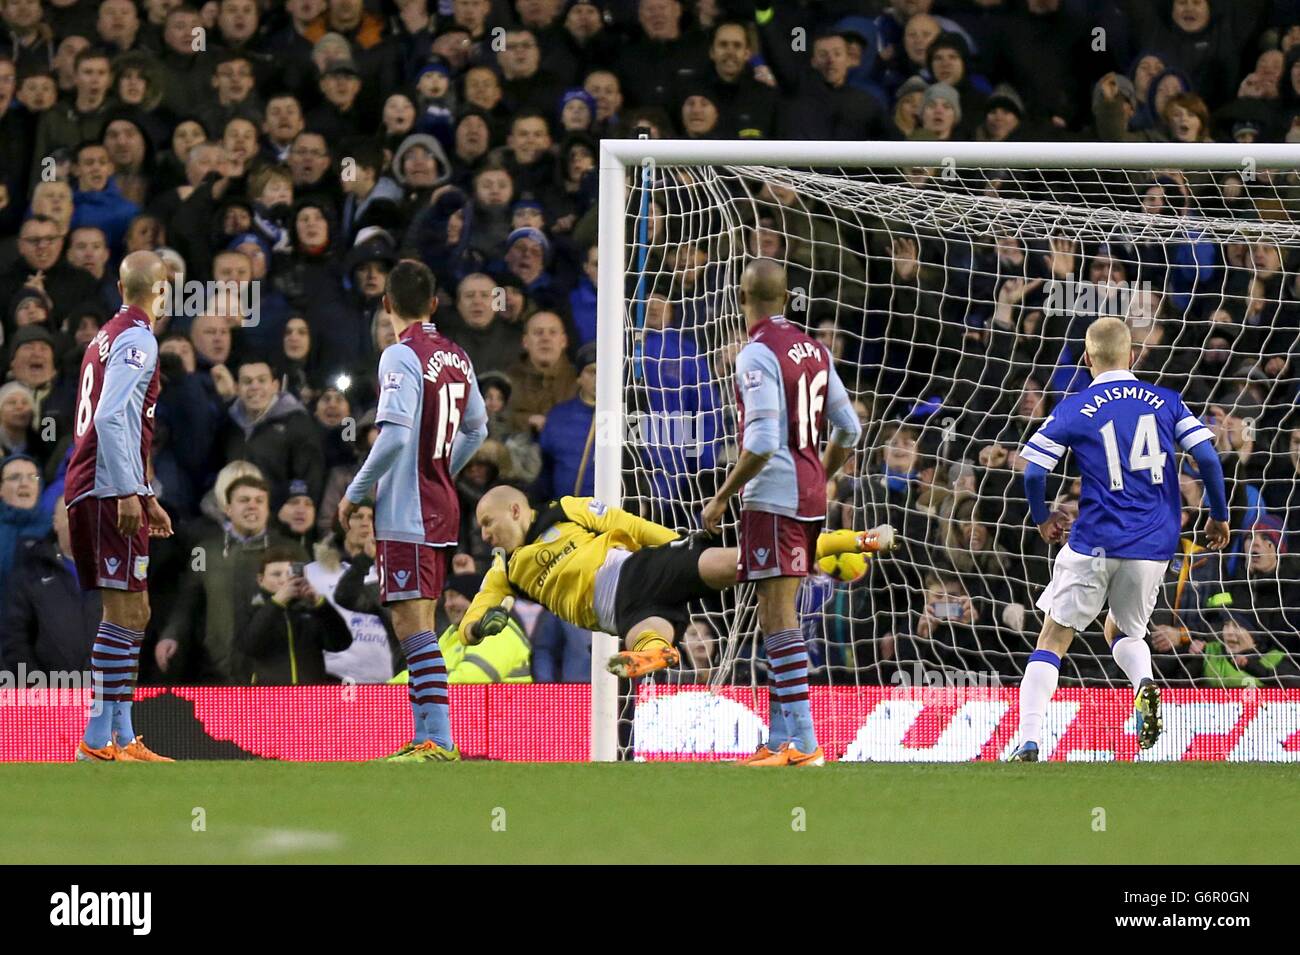 Players turn to watch Aston Villa goalkeeper Bradley Guzan (behind) fail to stop Everton's Kevin Mirallas (not in picture) from scoring their second goal of the game Stock Photo